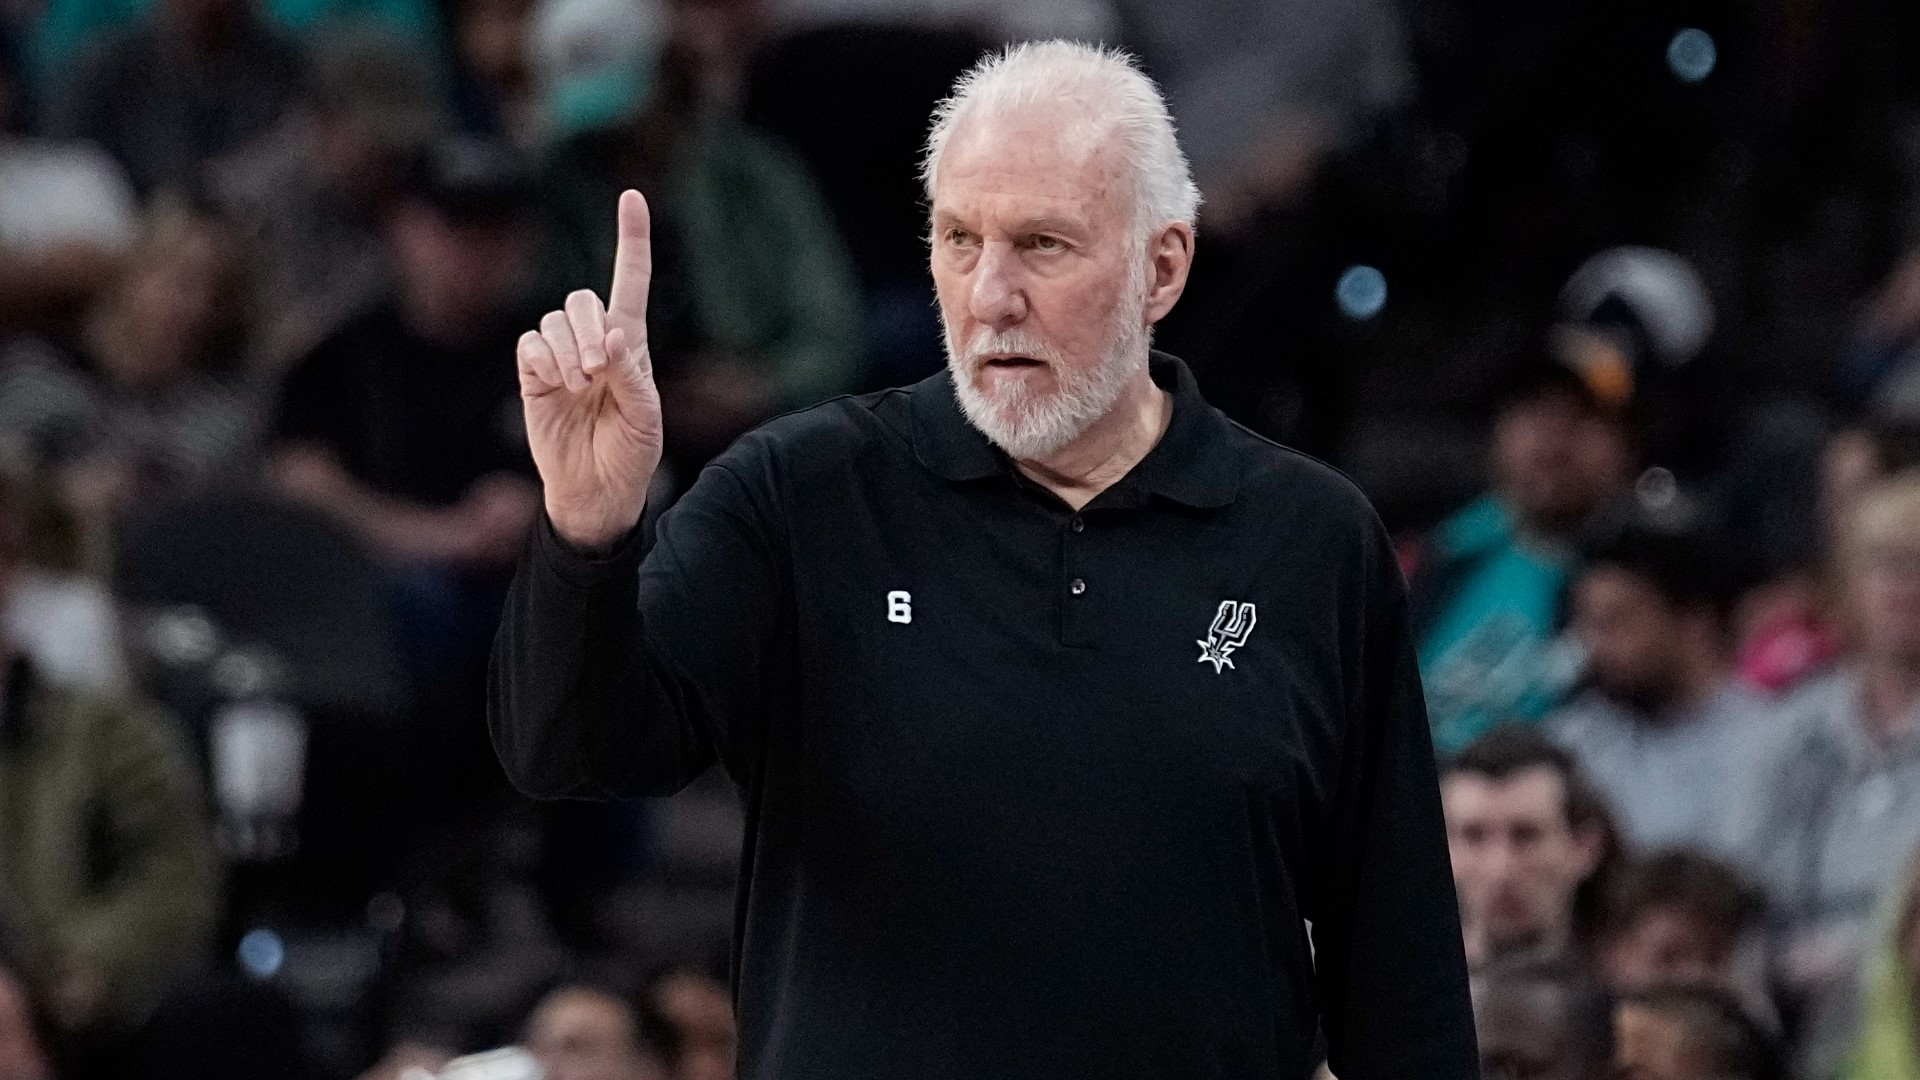 "He's a smart guy, he'll figure it out even if I don't," Popovich said as he pondered the best way to use his star rookie.